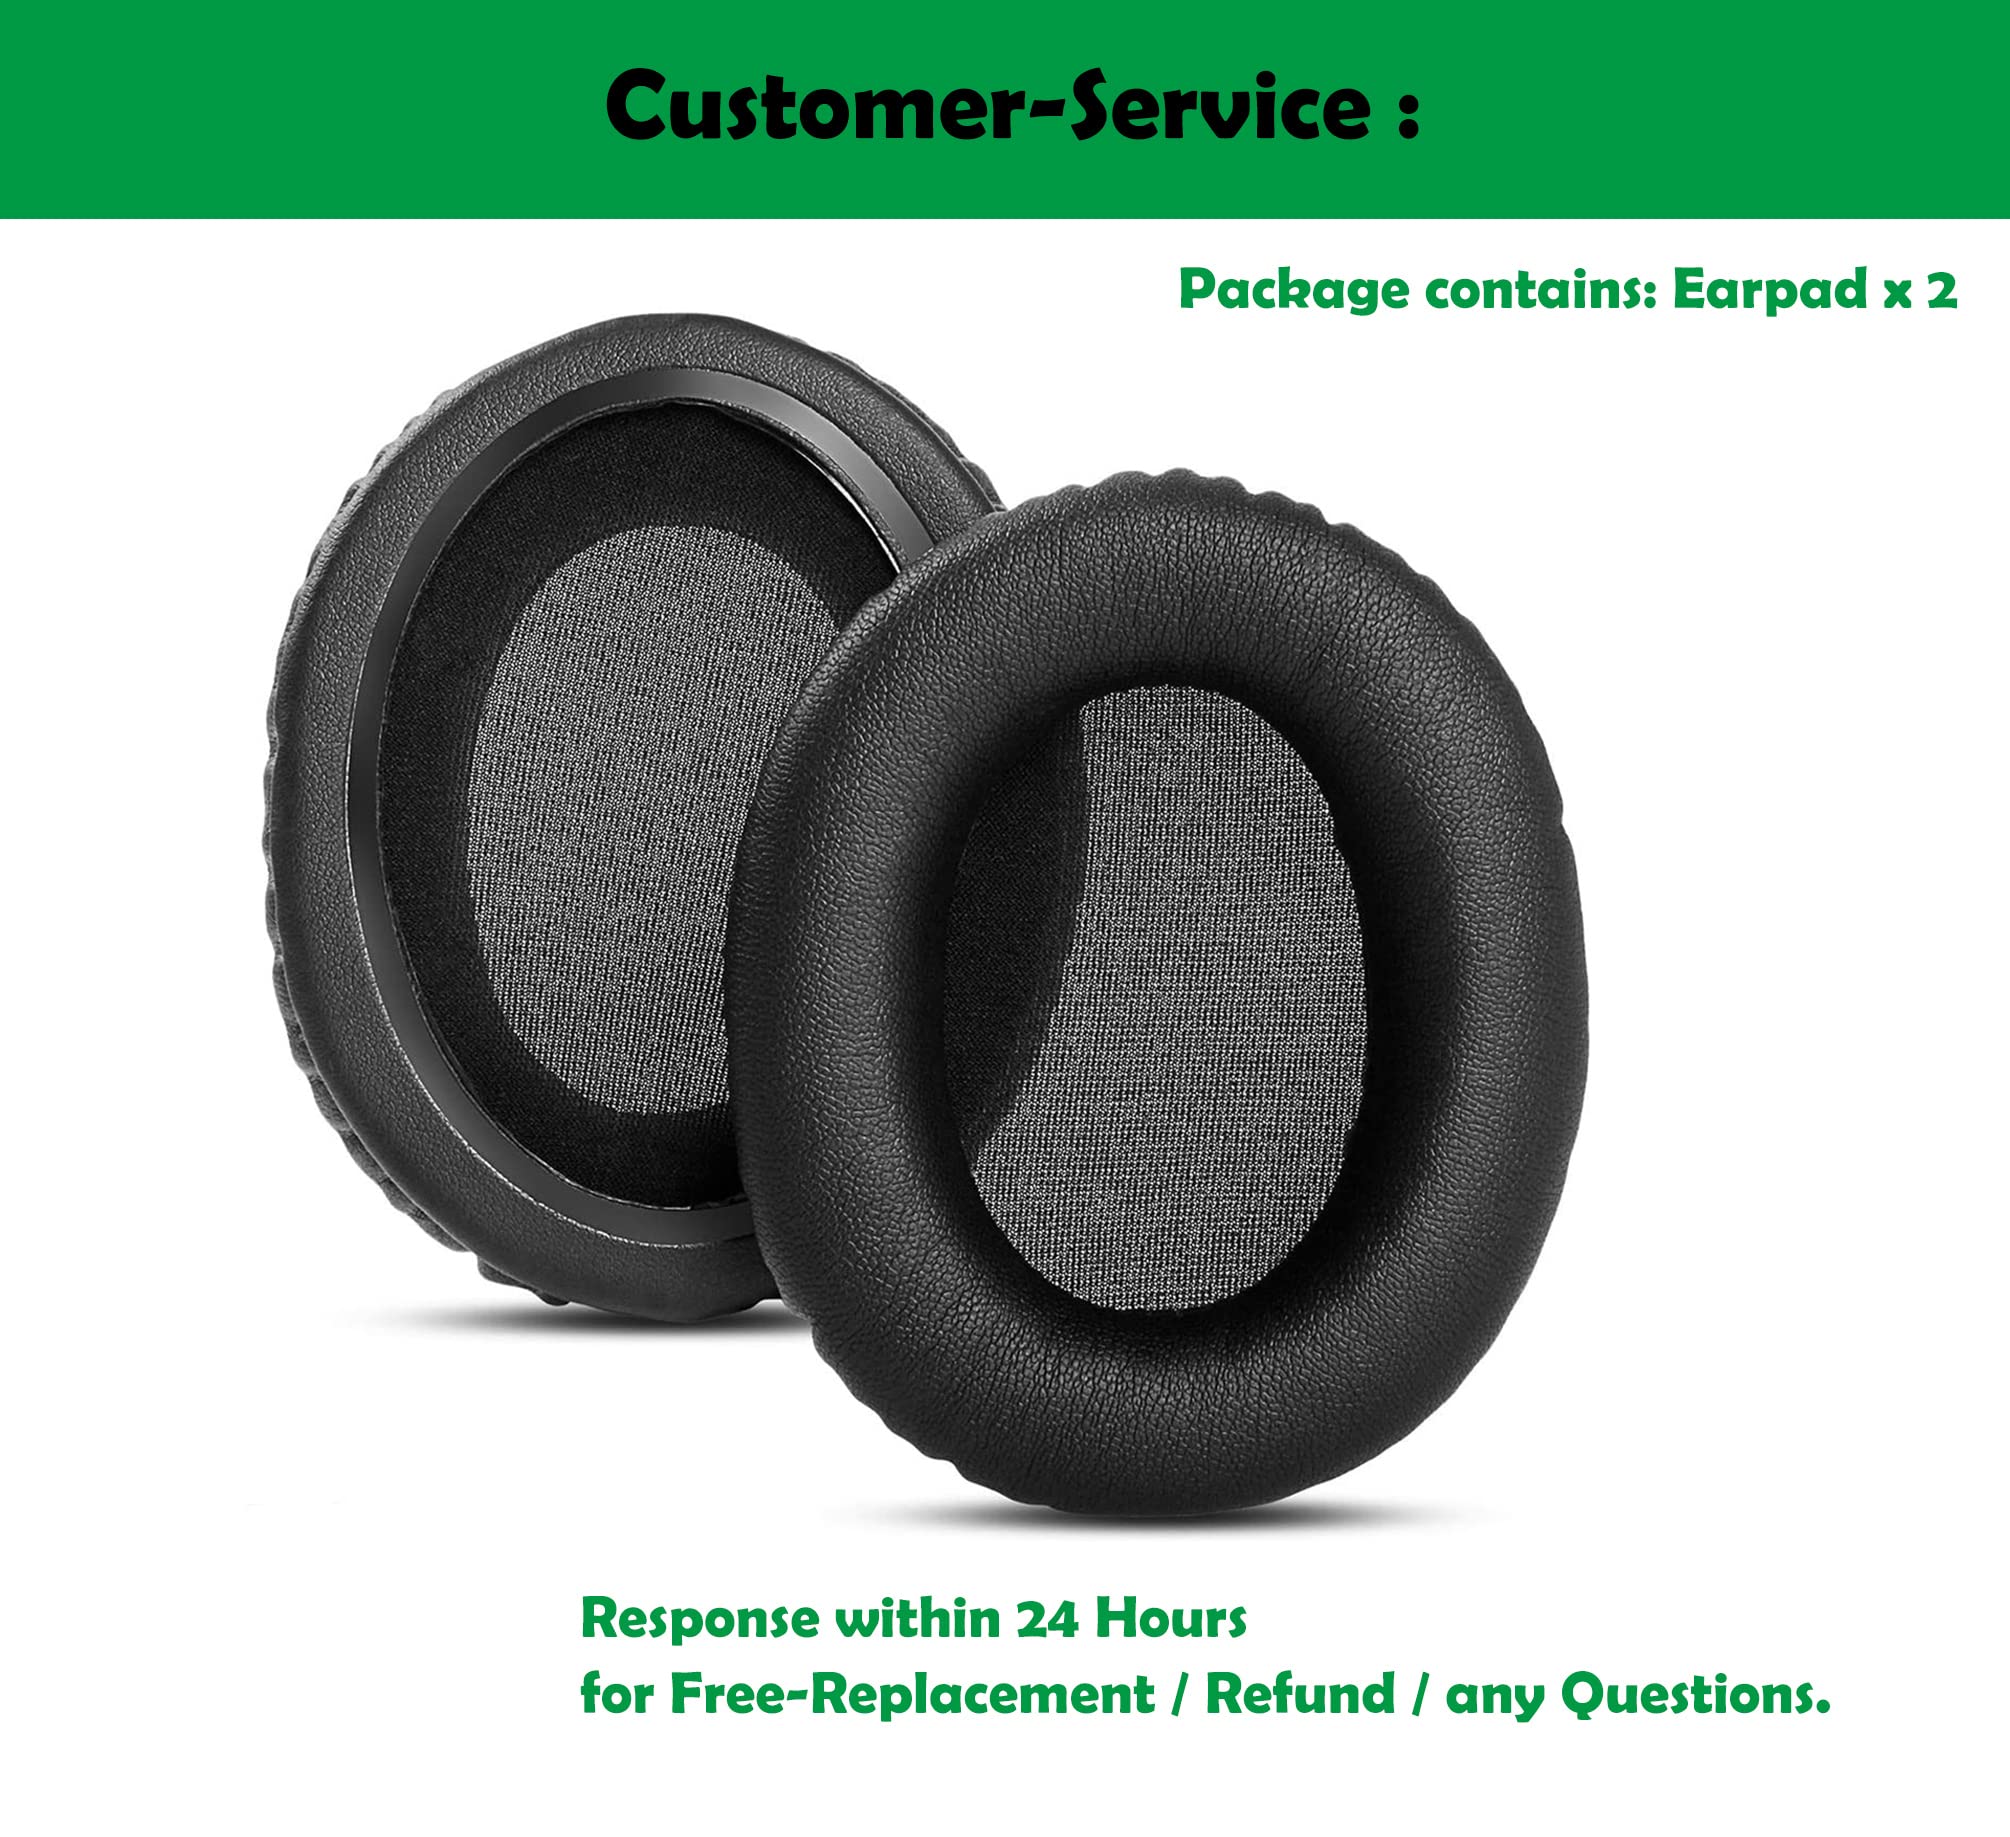 DowiTech Supreme Comfort Headphone Replacement Ear Pads Cushions Headset Earpads Compatible with Sony MDR-ZX770BN ZX780DC Headphones